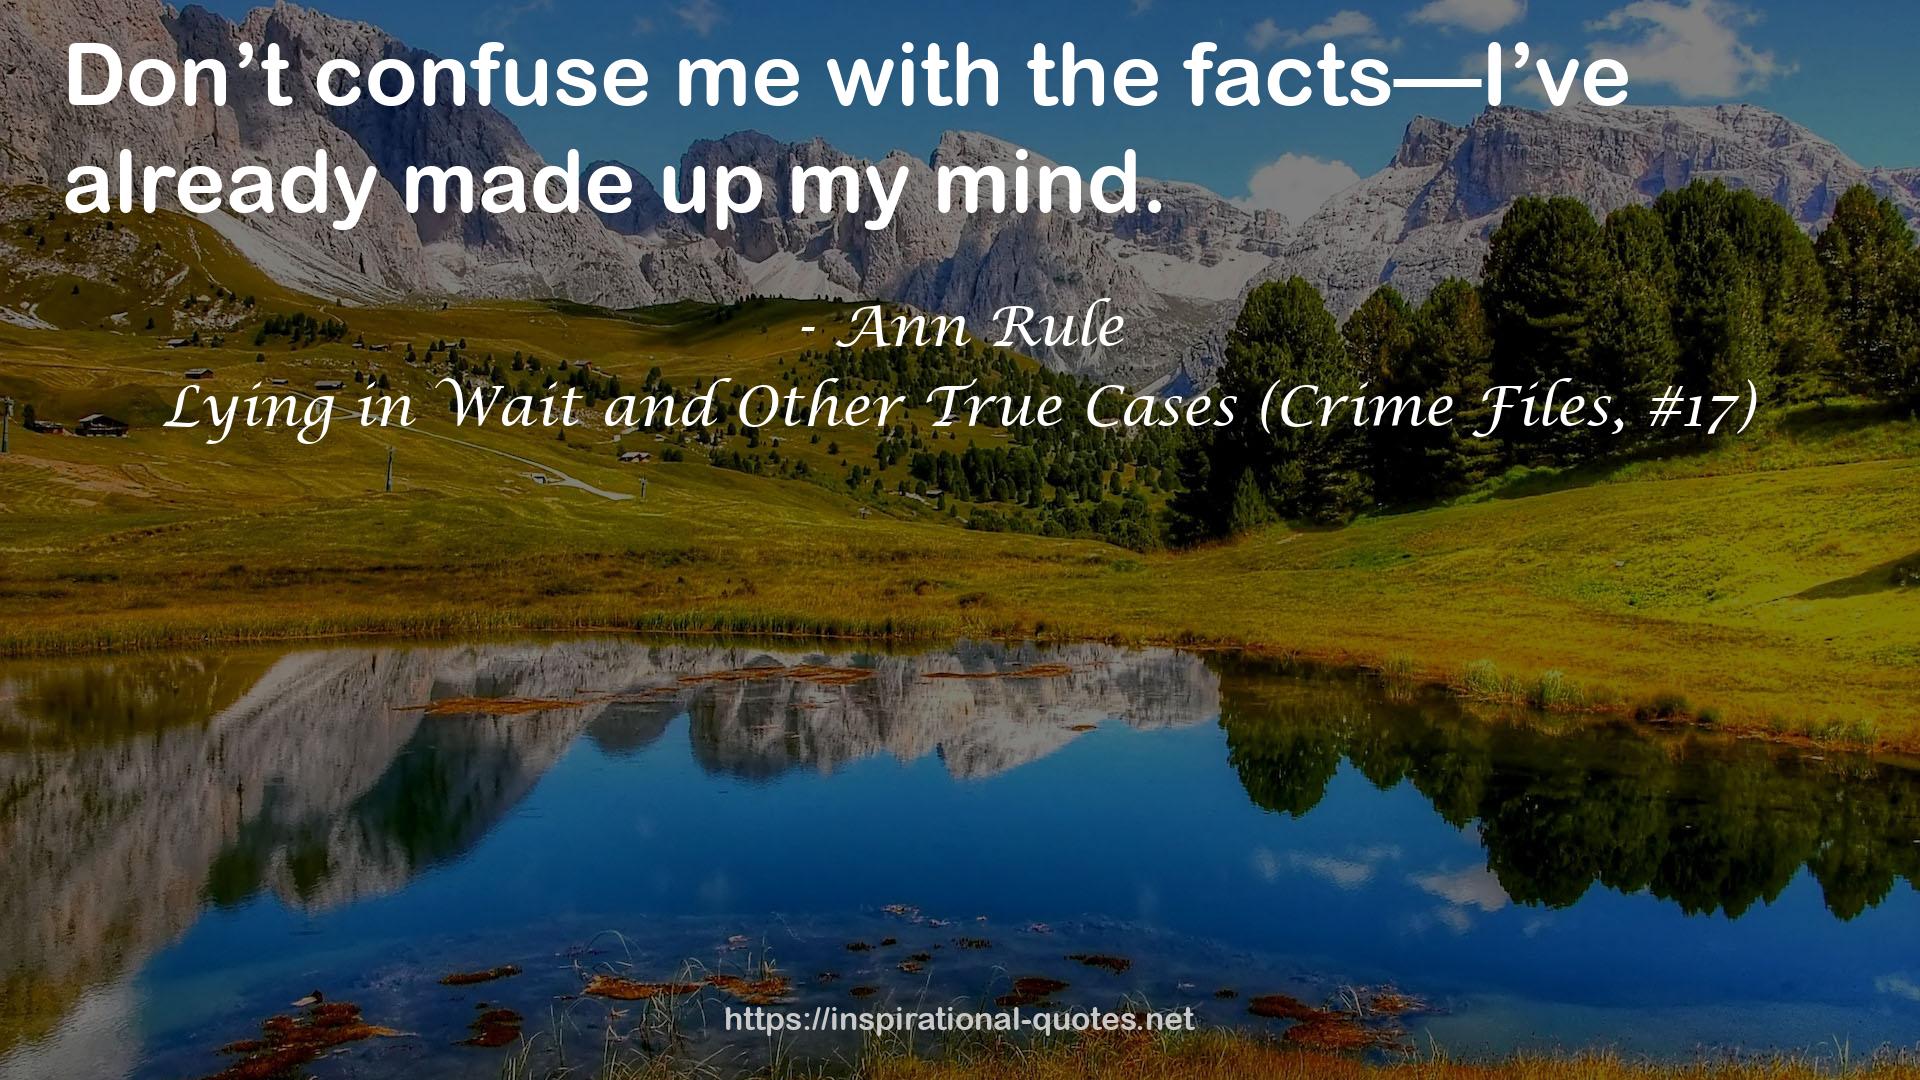 Lying in Wait and Other True Cases (Crime Files, #17) QUOTES